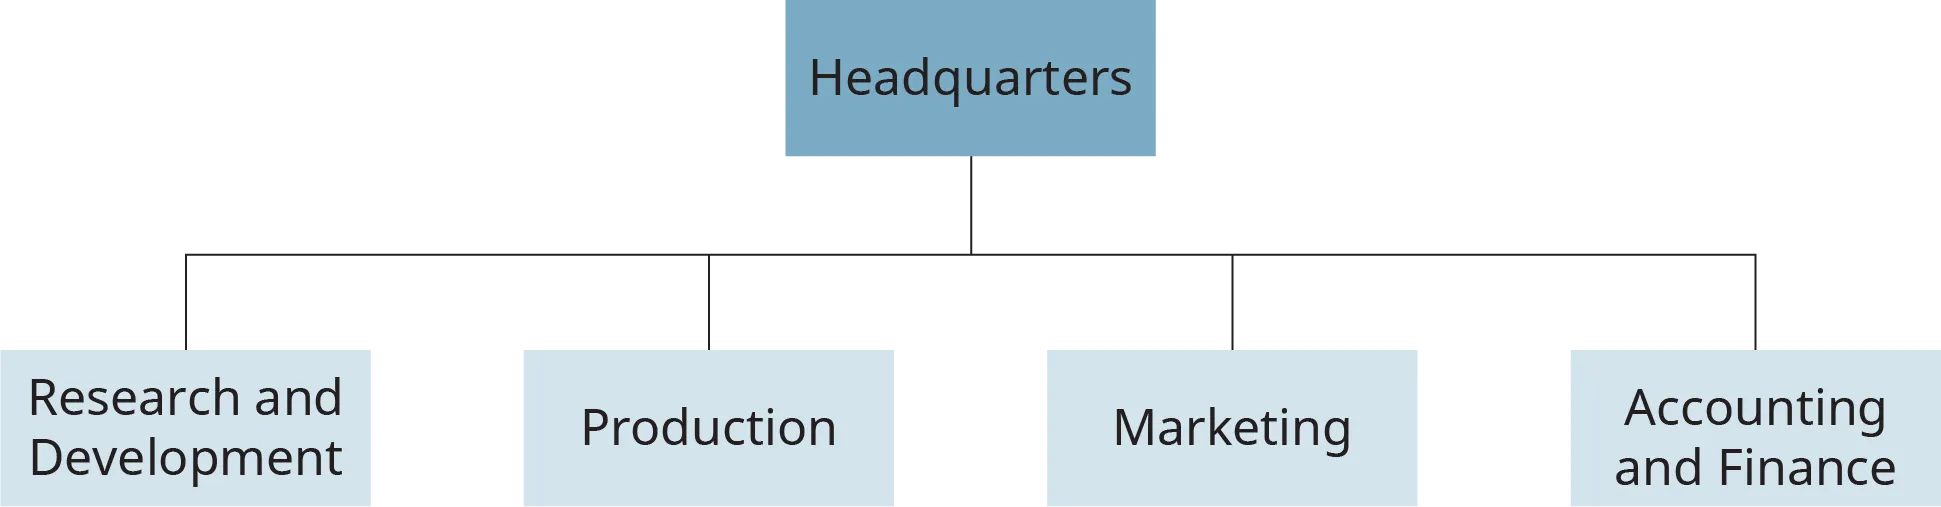 A flowchart shows an example of a functional structure in an organization. It shows the main branch labeled “Headquarters” divided into four sub-branches labeled, “Research and Development,” “Production,” “Marketing,” and “Accounting and Finance.”